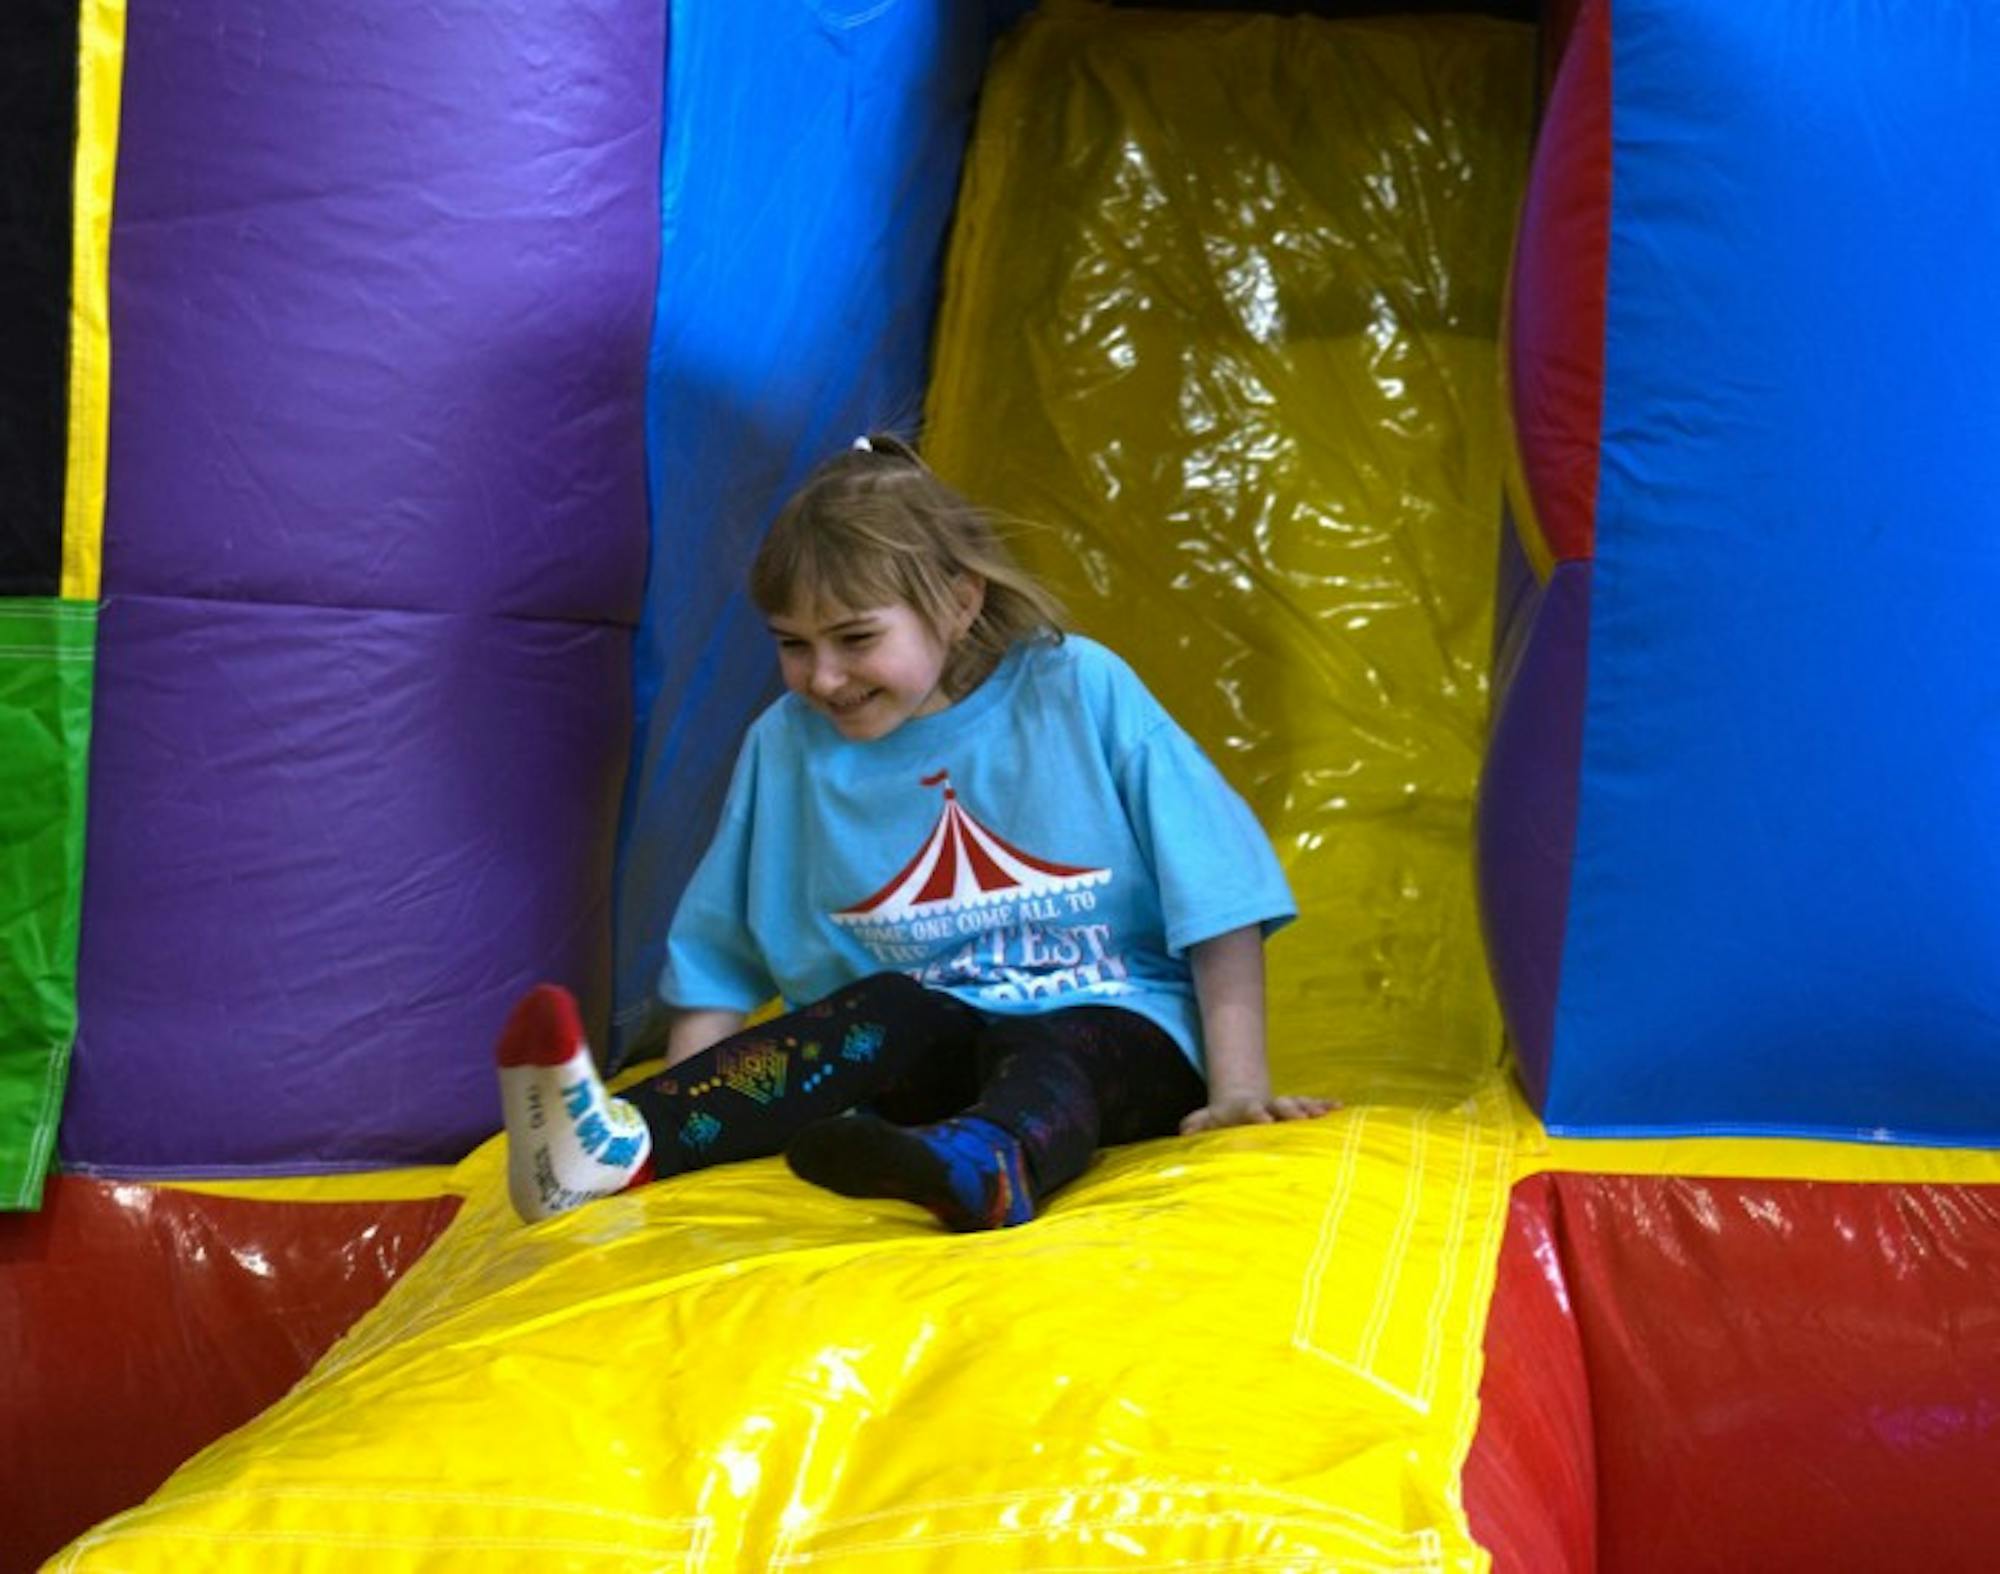 A girl plays on an inflatable slide as part of Saint Mary's annual 12 hour Dance Marathon that supports Riley Hospital for Children.